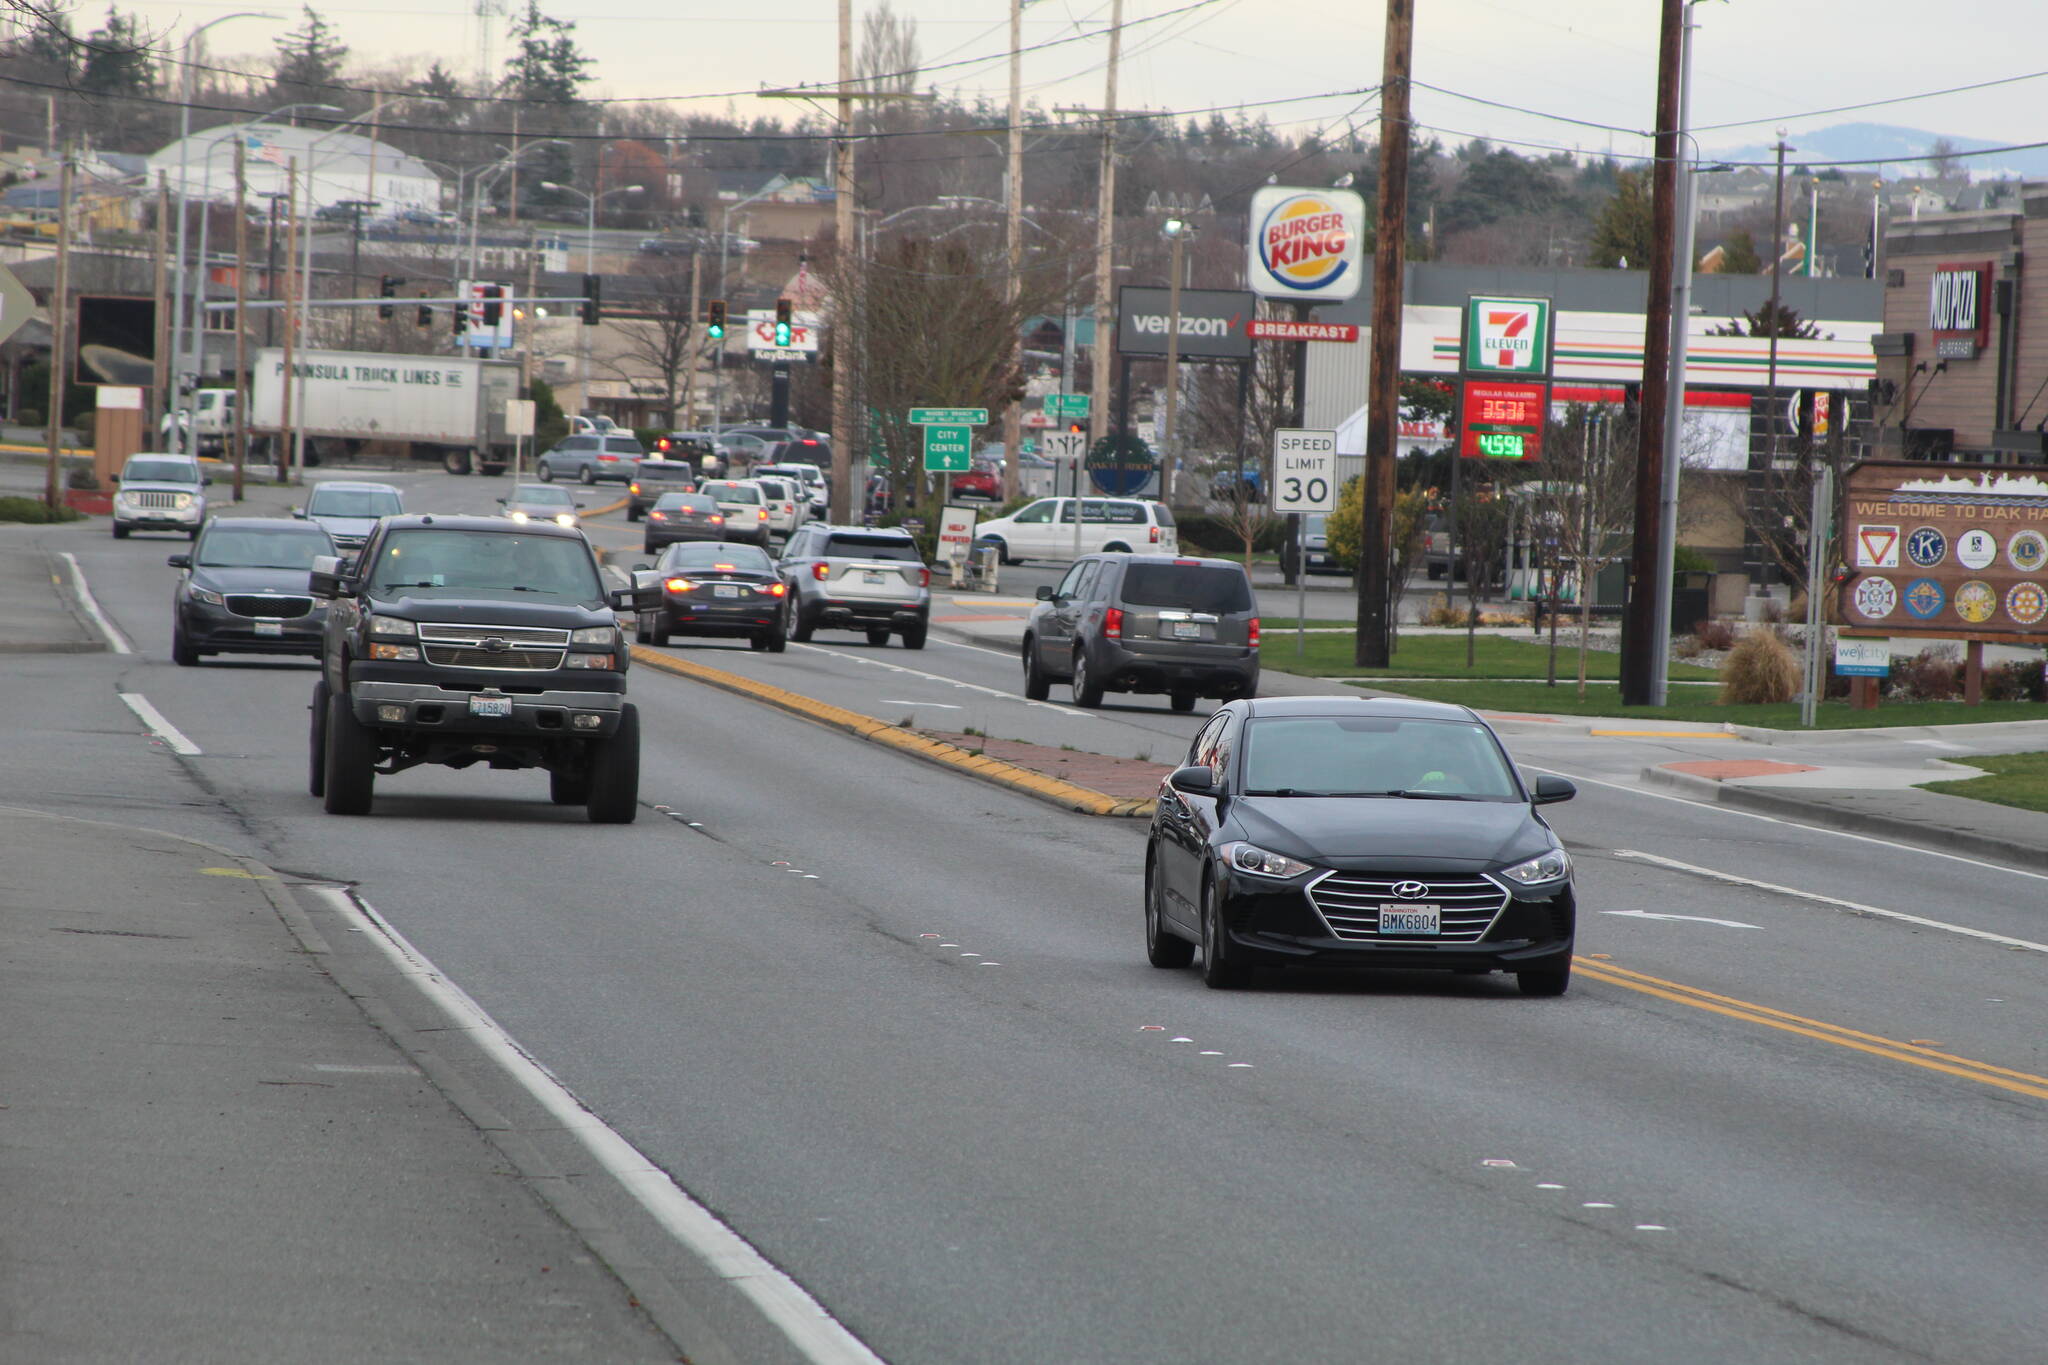 A road safety plan funded by a federal grant will prioritize projects to make Whidbey roads safer for all users. (Photo by Karina Andrew/Whidbey News-Times)